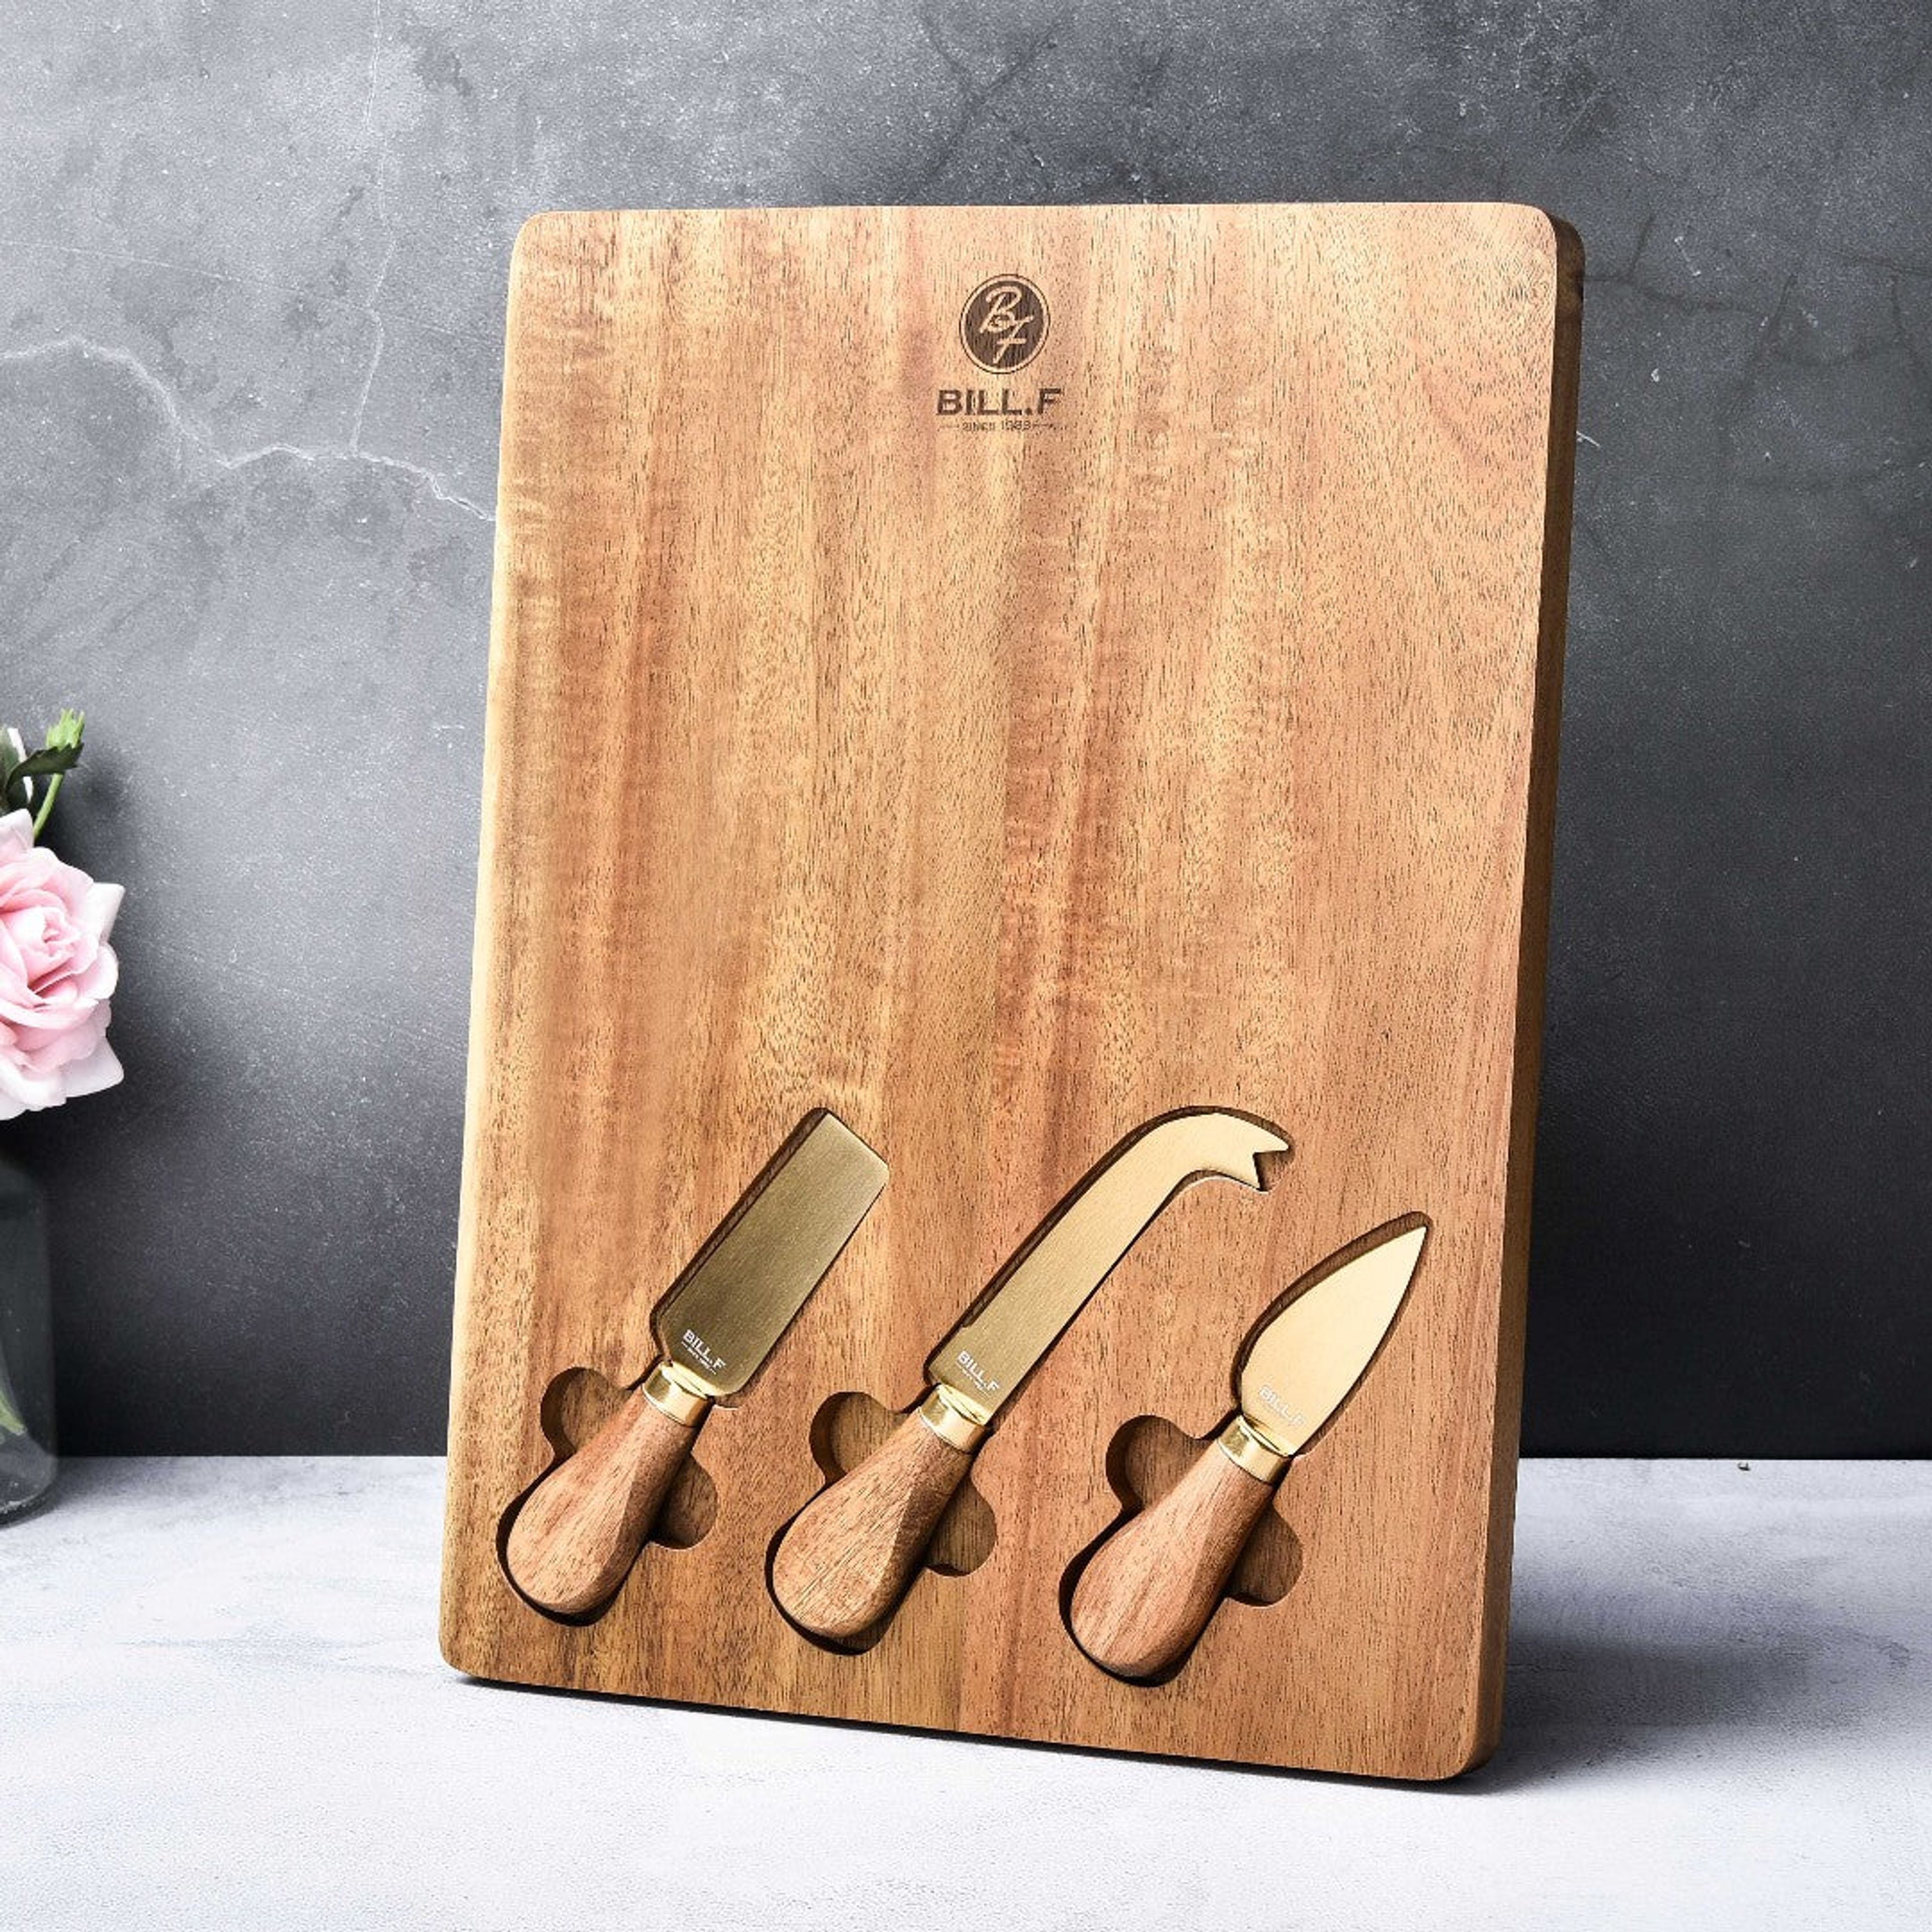 Wooden Charcuterie Board and Knife Set Cheese Platter Serving Tray 13"x10"